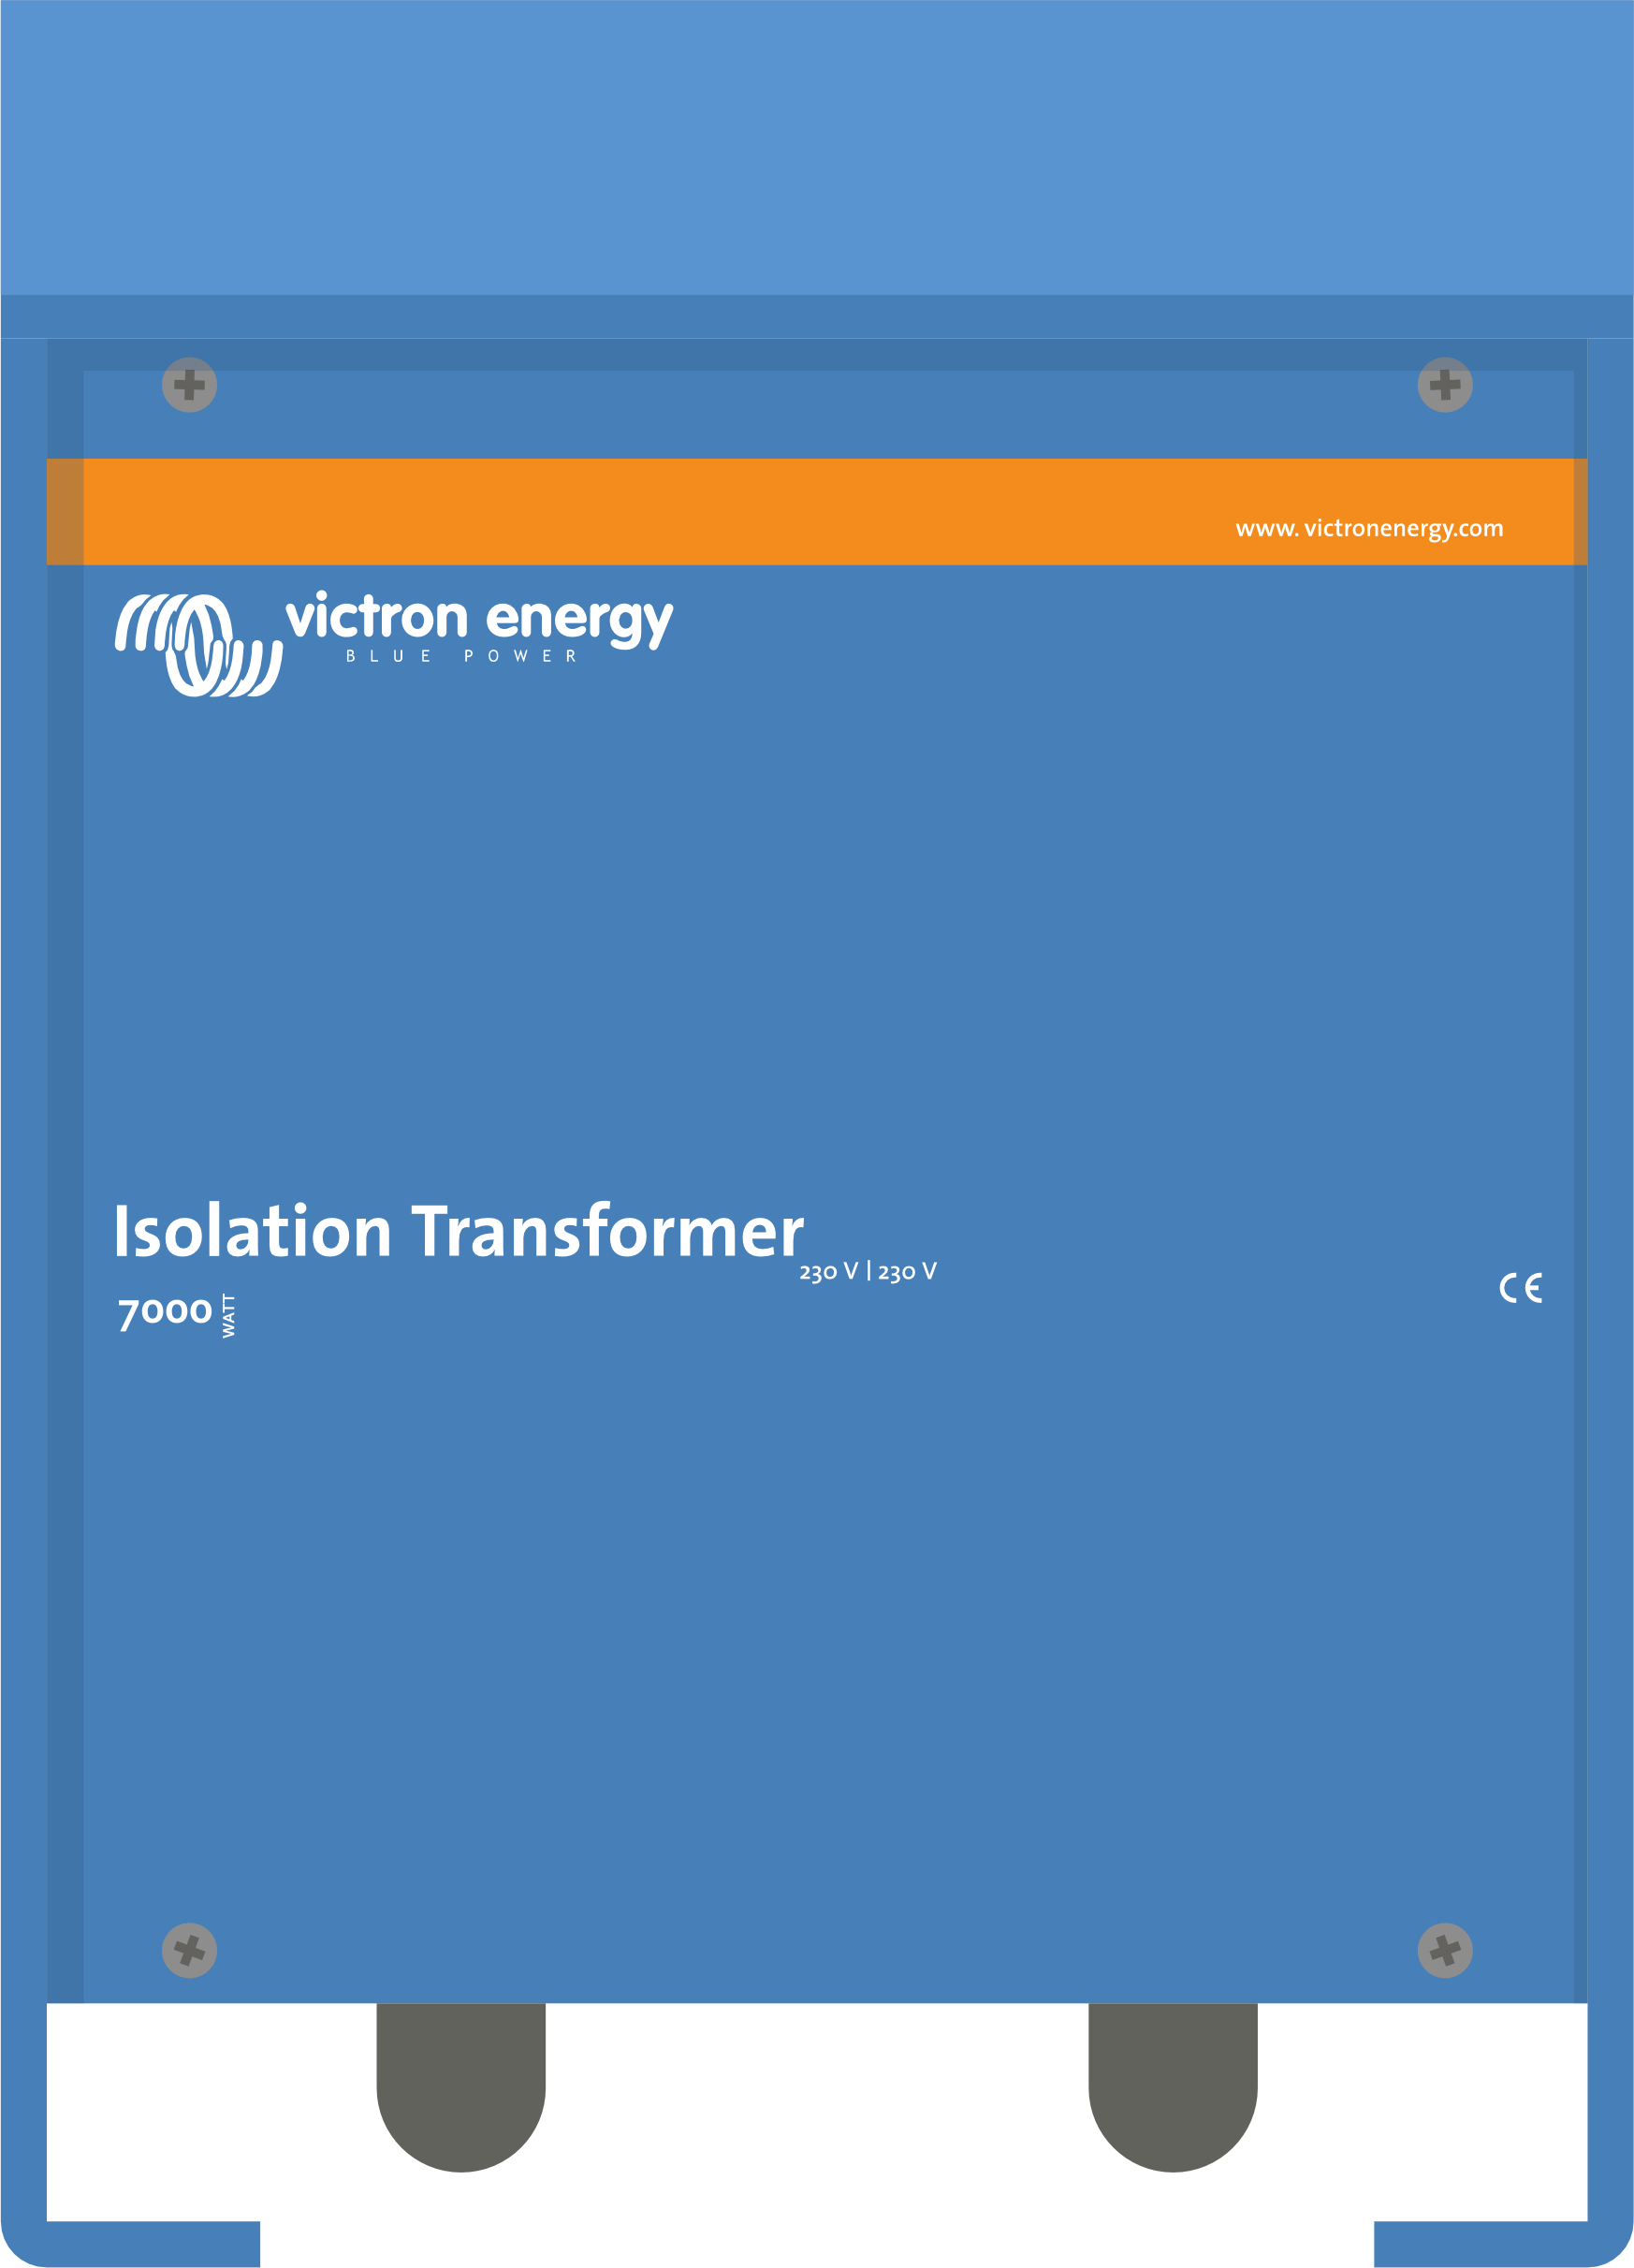 Isolation_transformer_7000W.png